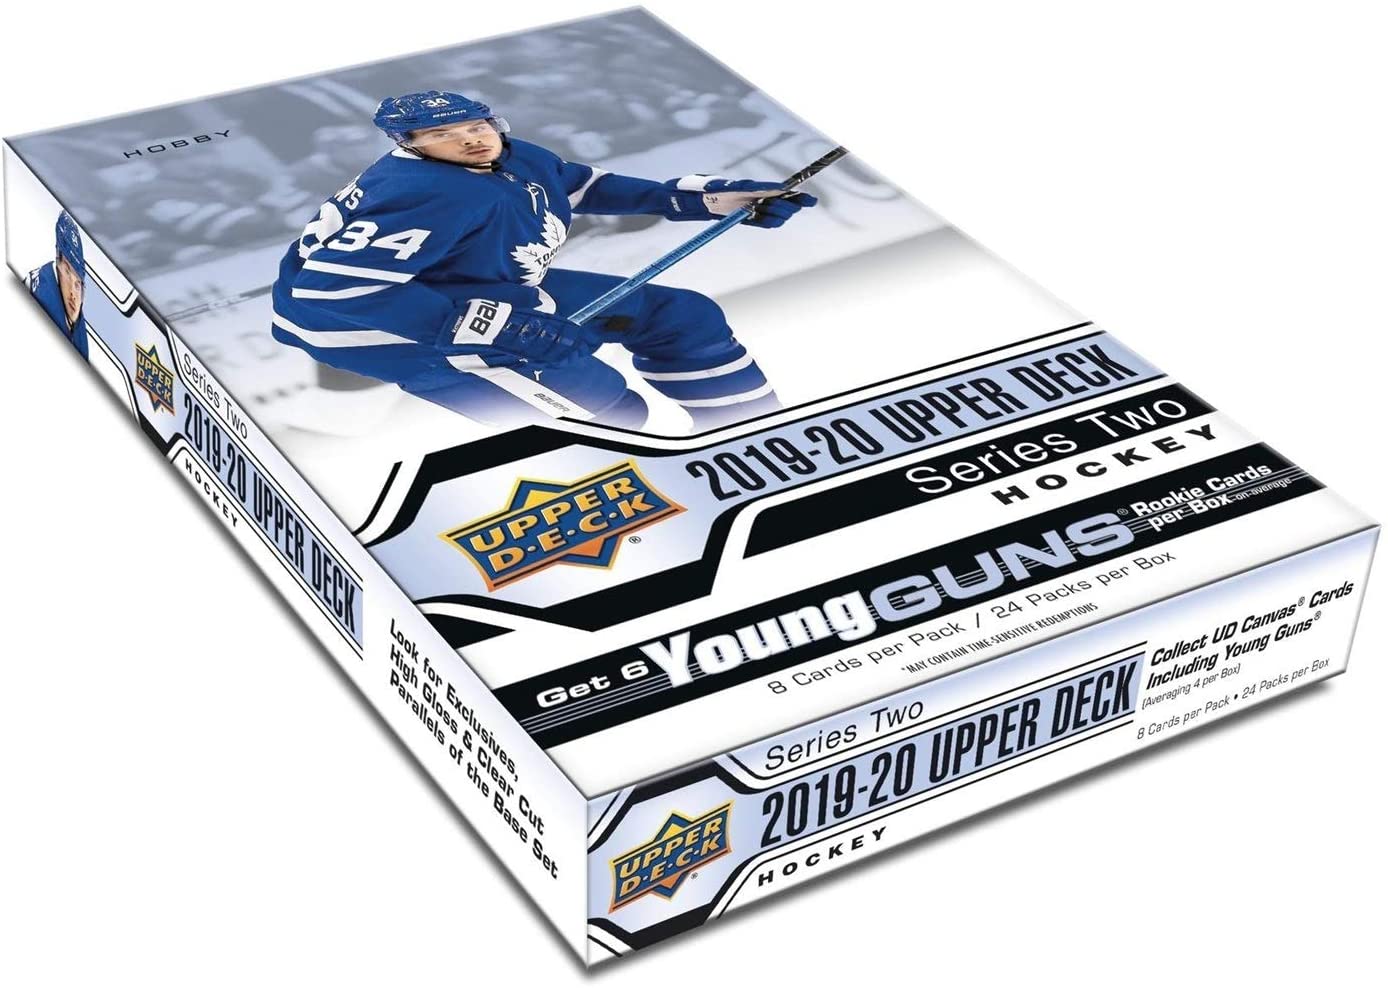 2019-20 Upper Deck Series 2 Hockey Hobby Case (Boxes of 12) - BigBoi Cards